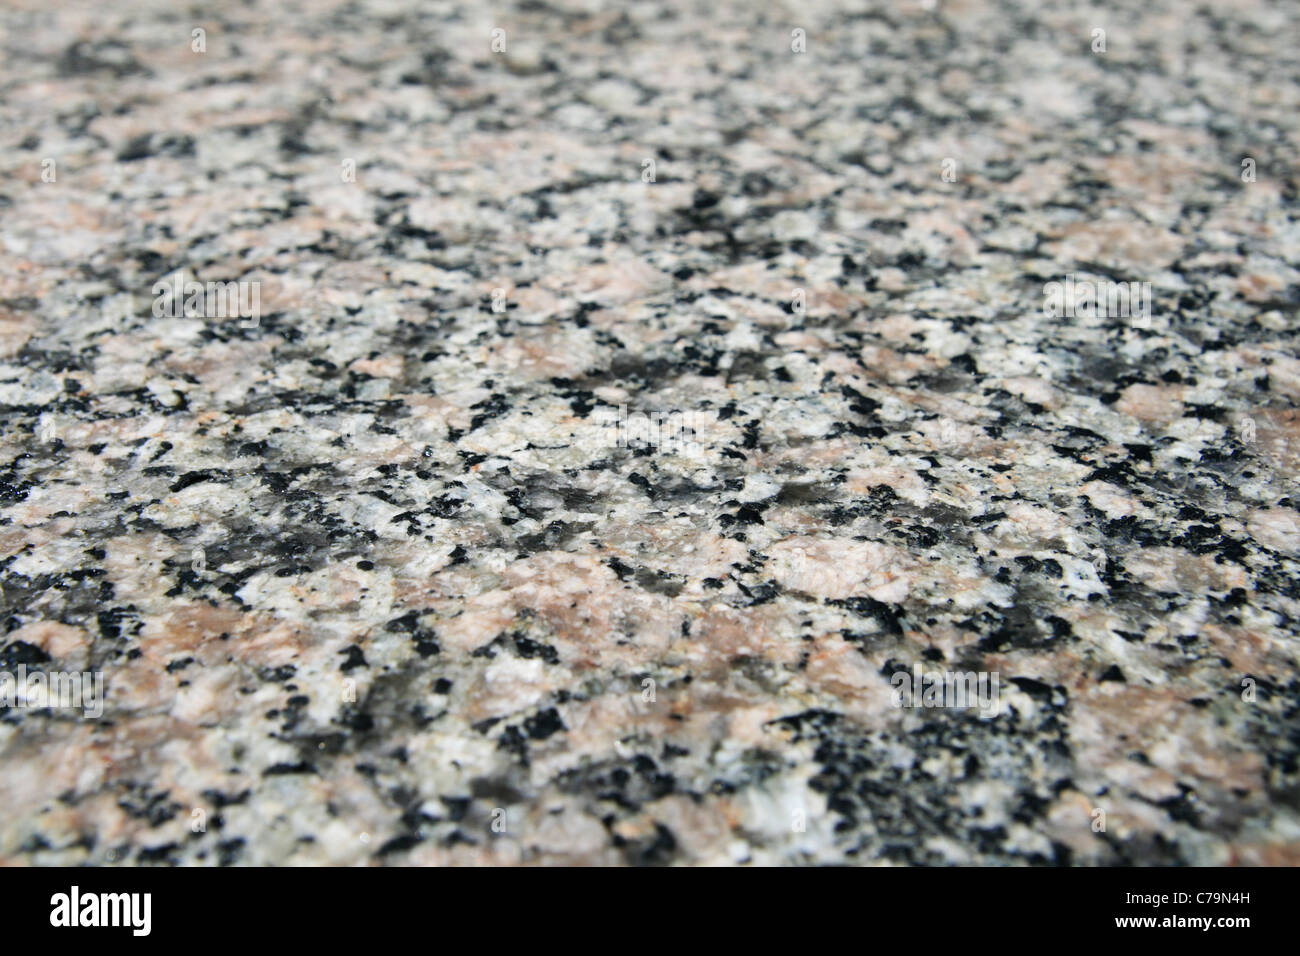 granite rock surface viewed from an angle with selective focus and shallow depth of field Stock Photo